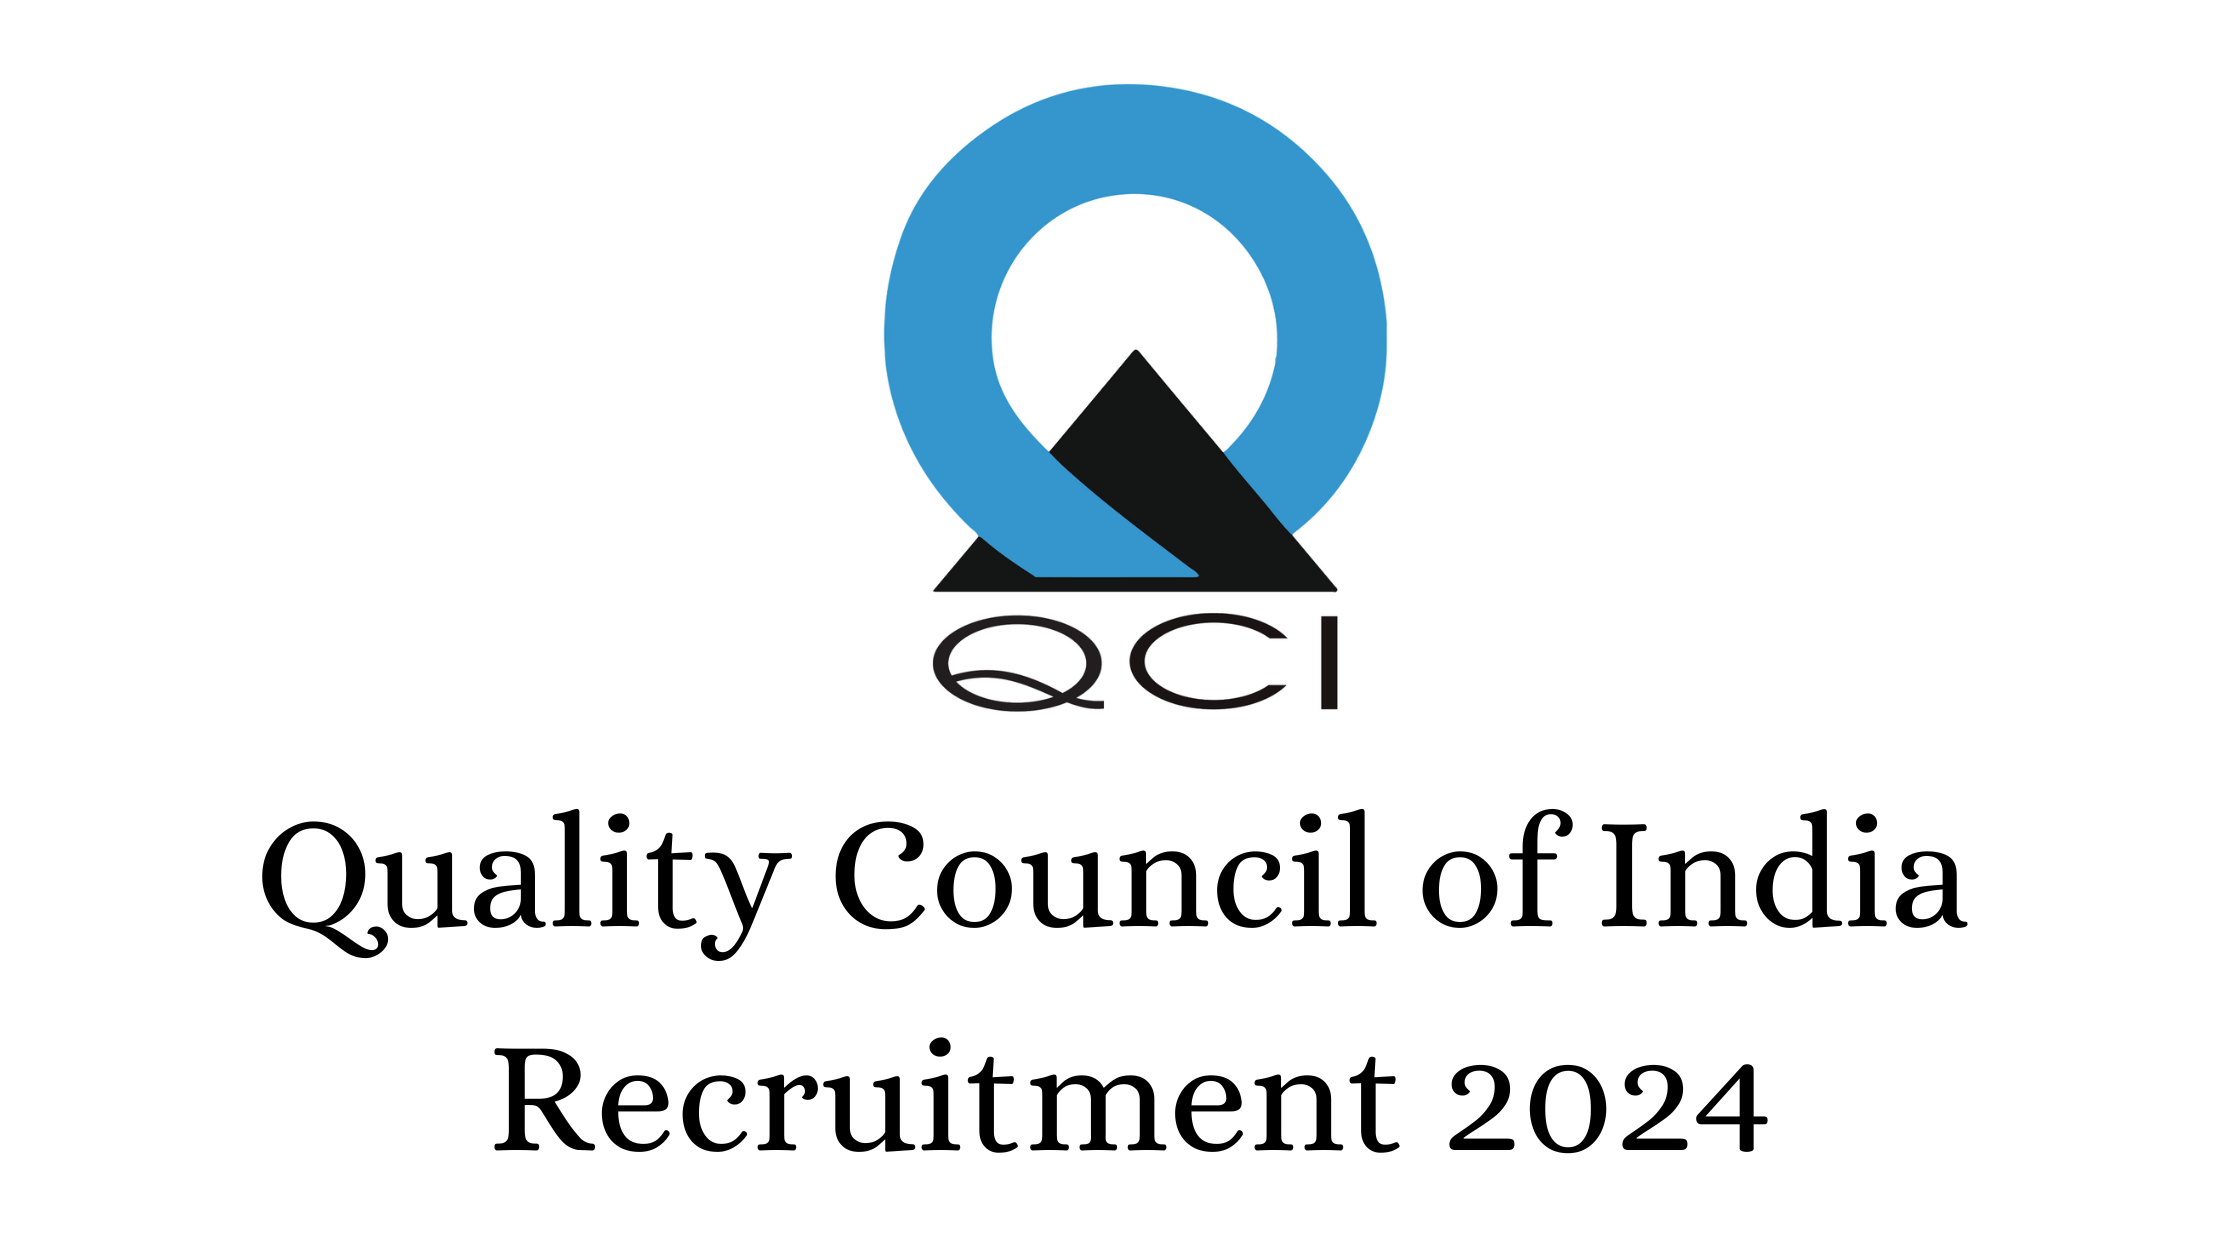 Quality Council of India Recruitment 2024